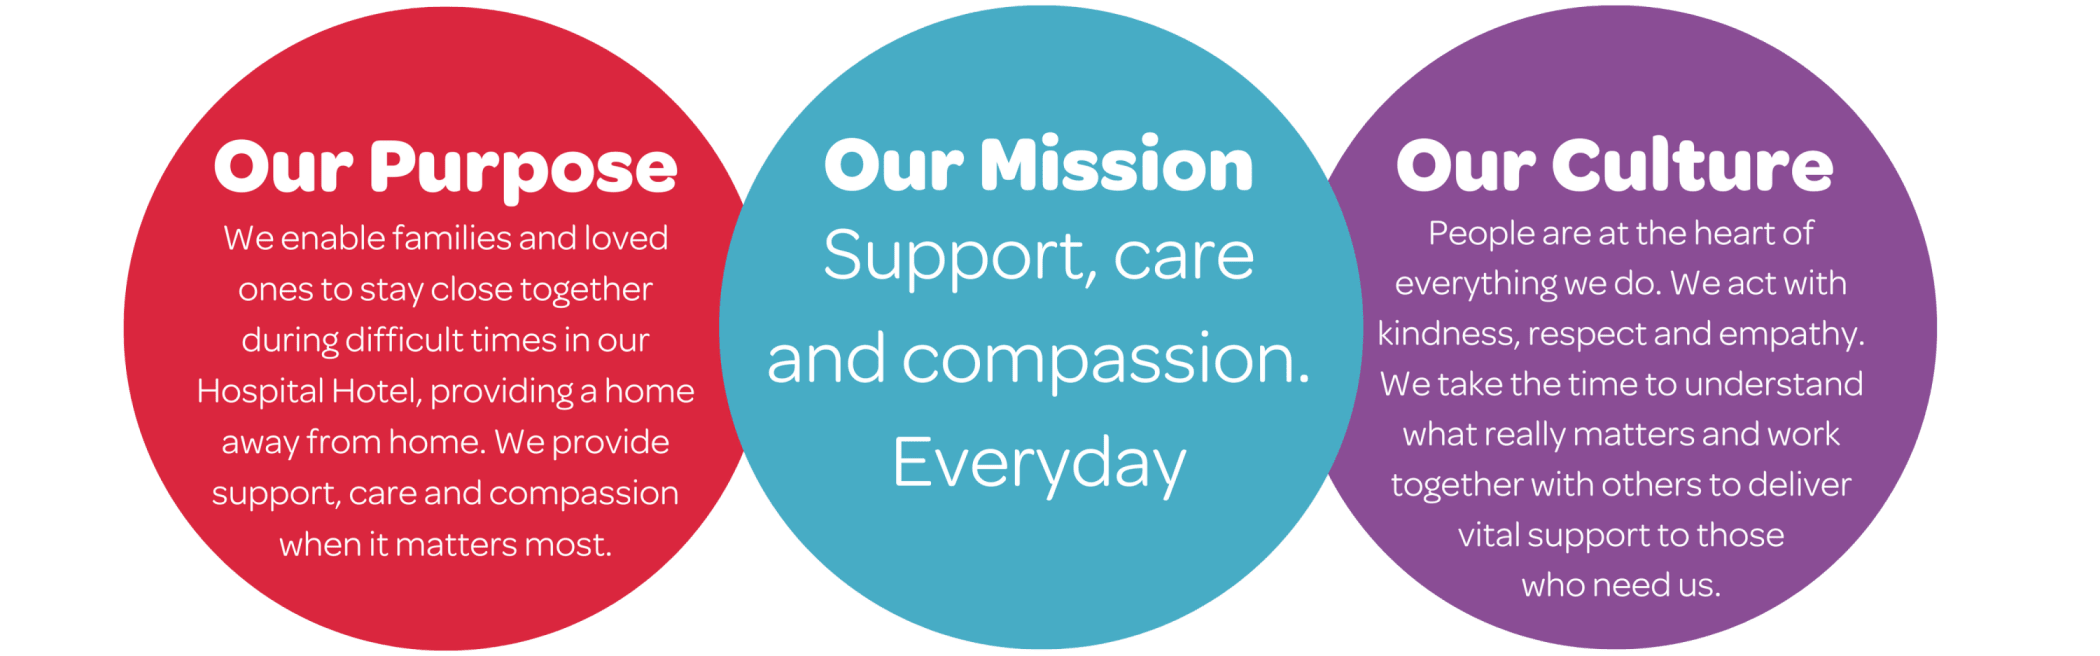 Our charities mission, vision and culture.